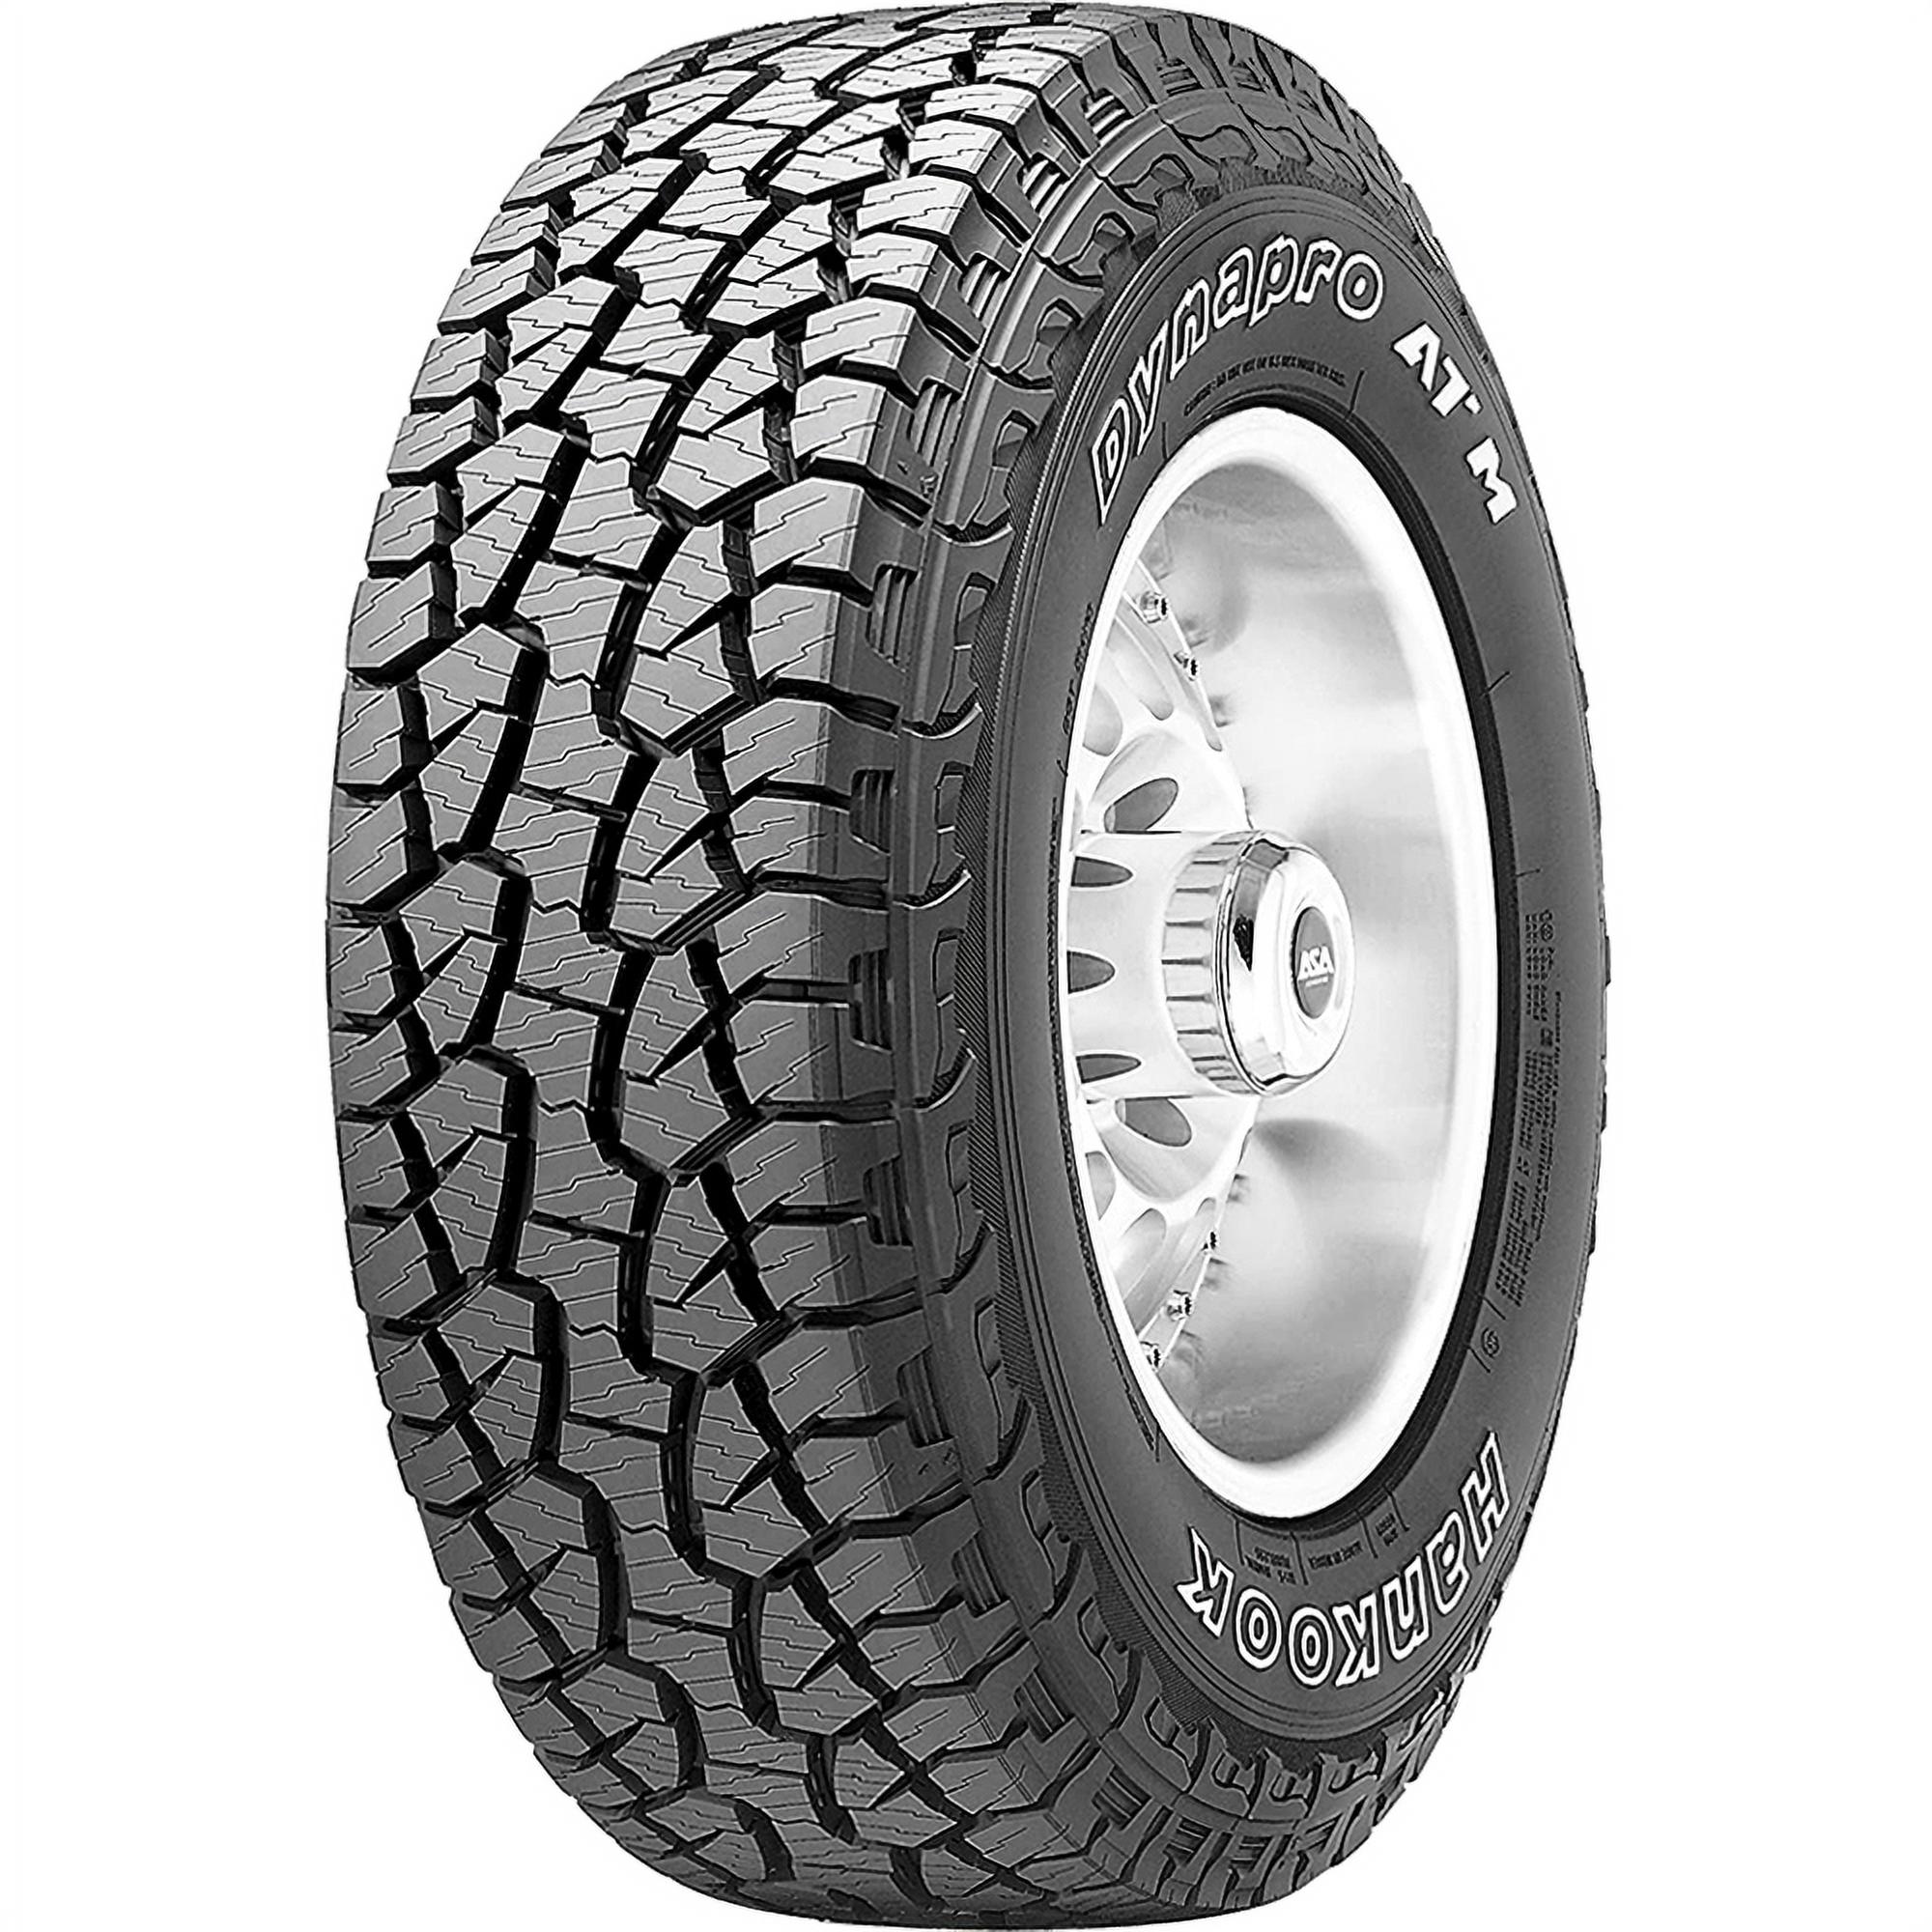 Hankook Dynapro ATM RF10 All-Terrain Tire - LT315/70R17 LRD 8PLY Rated - image 2 of 3